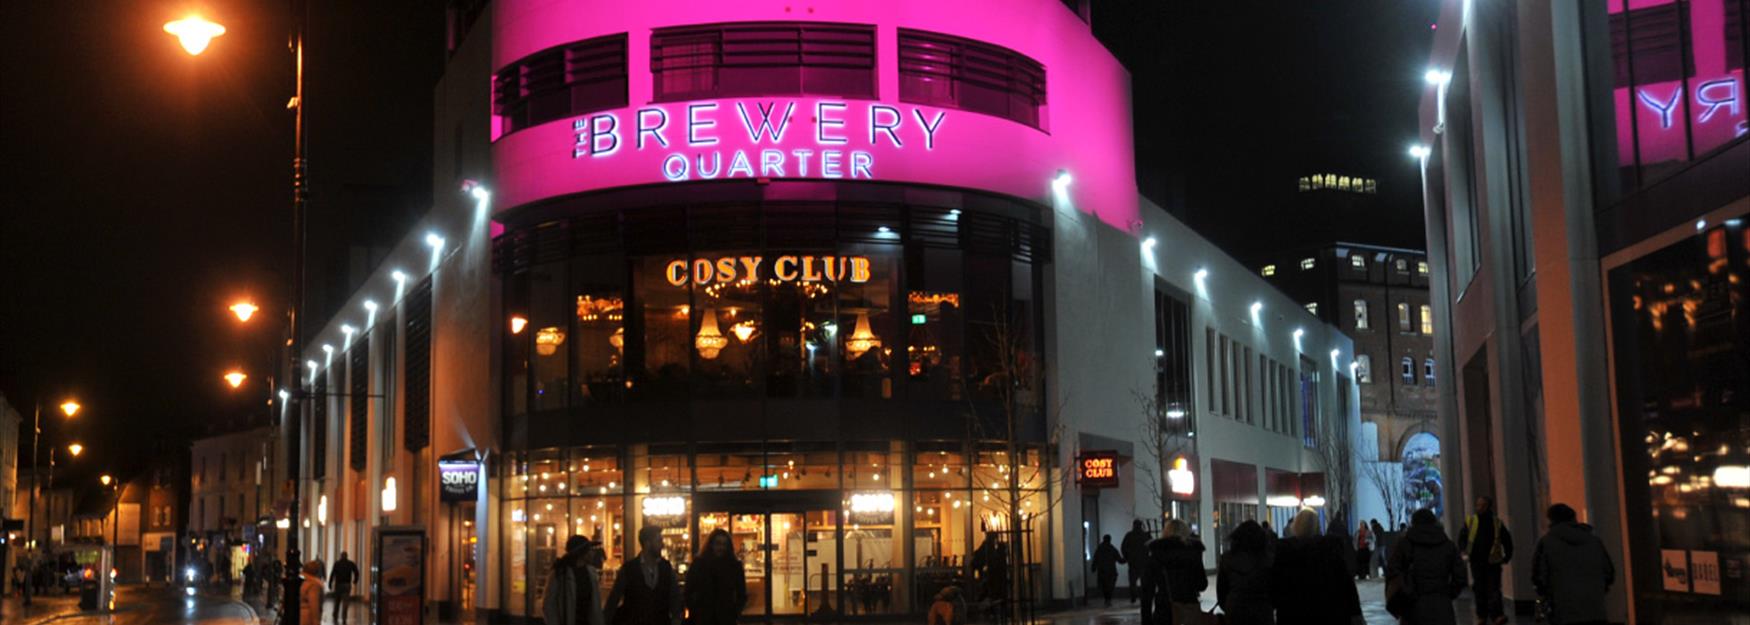 The Brewery Quarter lit up at night